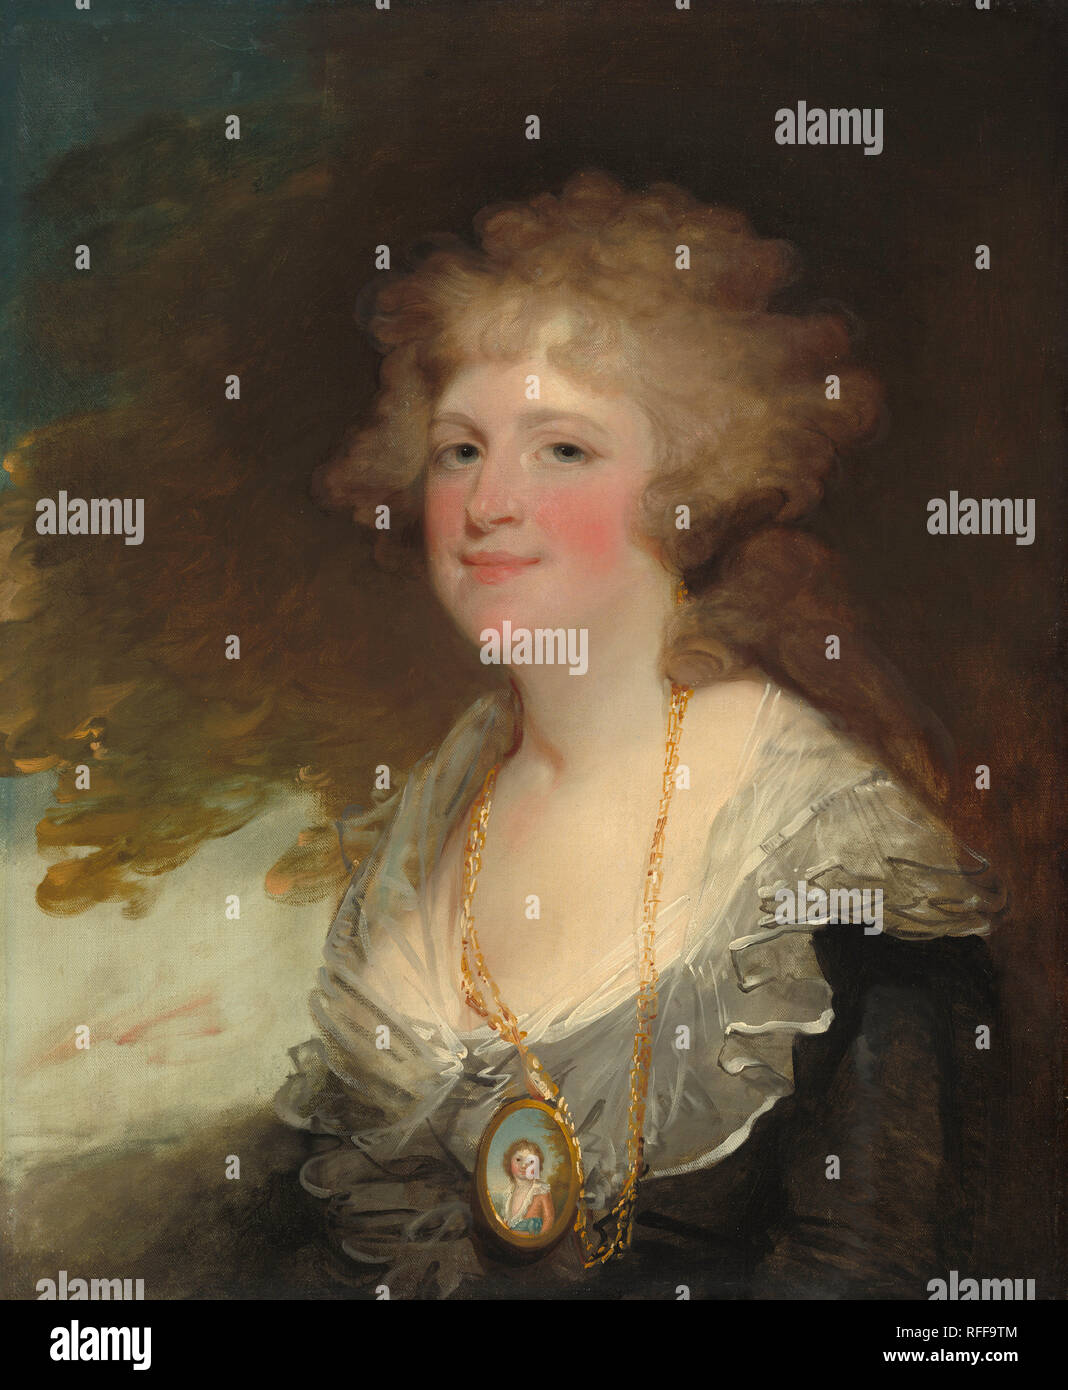 Sarah Shippen Lea (Mrs. Thomas Lea). Dated: c. 1798. Dimensions: overall: 73.98 × 60.8 cm (29 1/8 × 23 15/16 in.)  framed: 91.44 × 77.79 × 7.62 cm (36 × 30 5/8 × 3 in.). Medium: oil on canvas. Museum: National Gallery of Art, Washington DC. Author: GILBERT STUART. Stock Photo